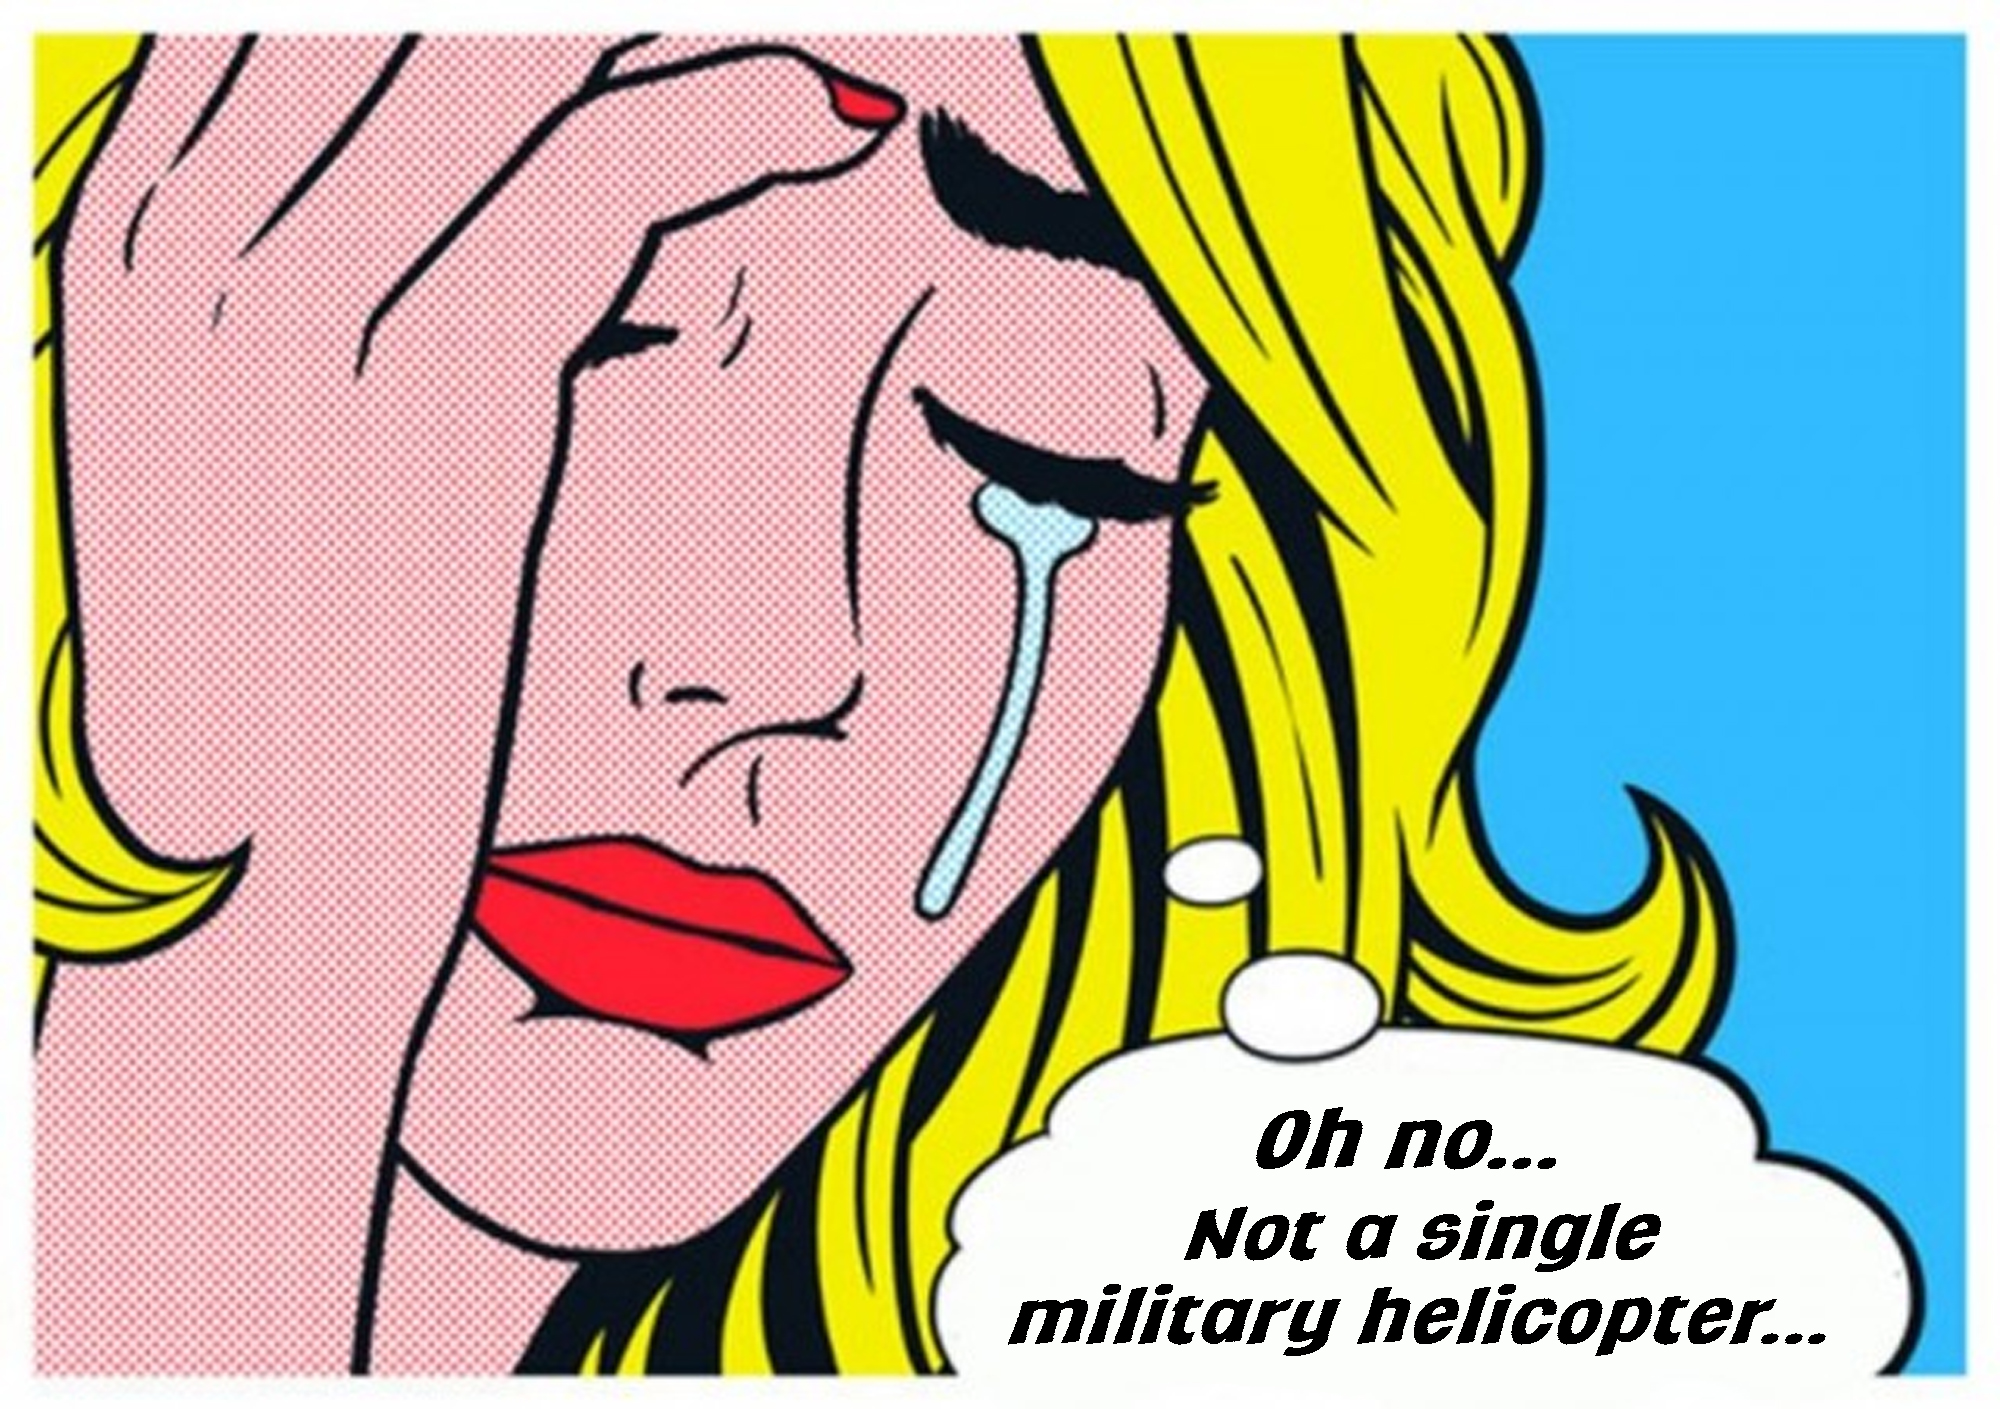 Helicopters - Military